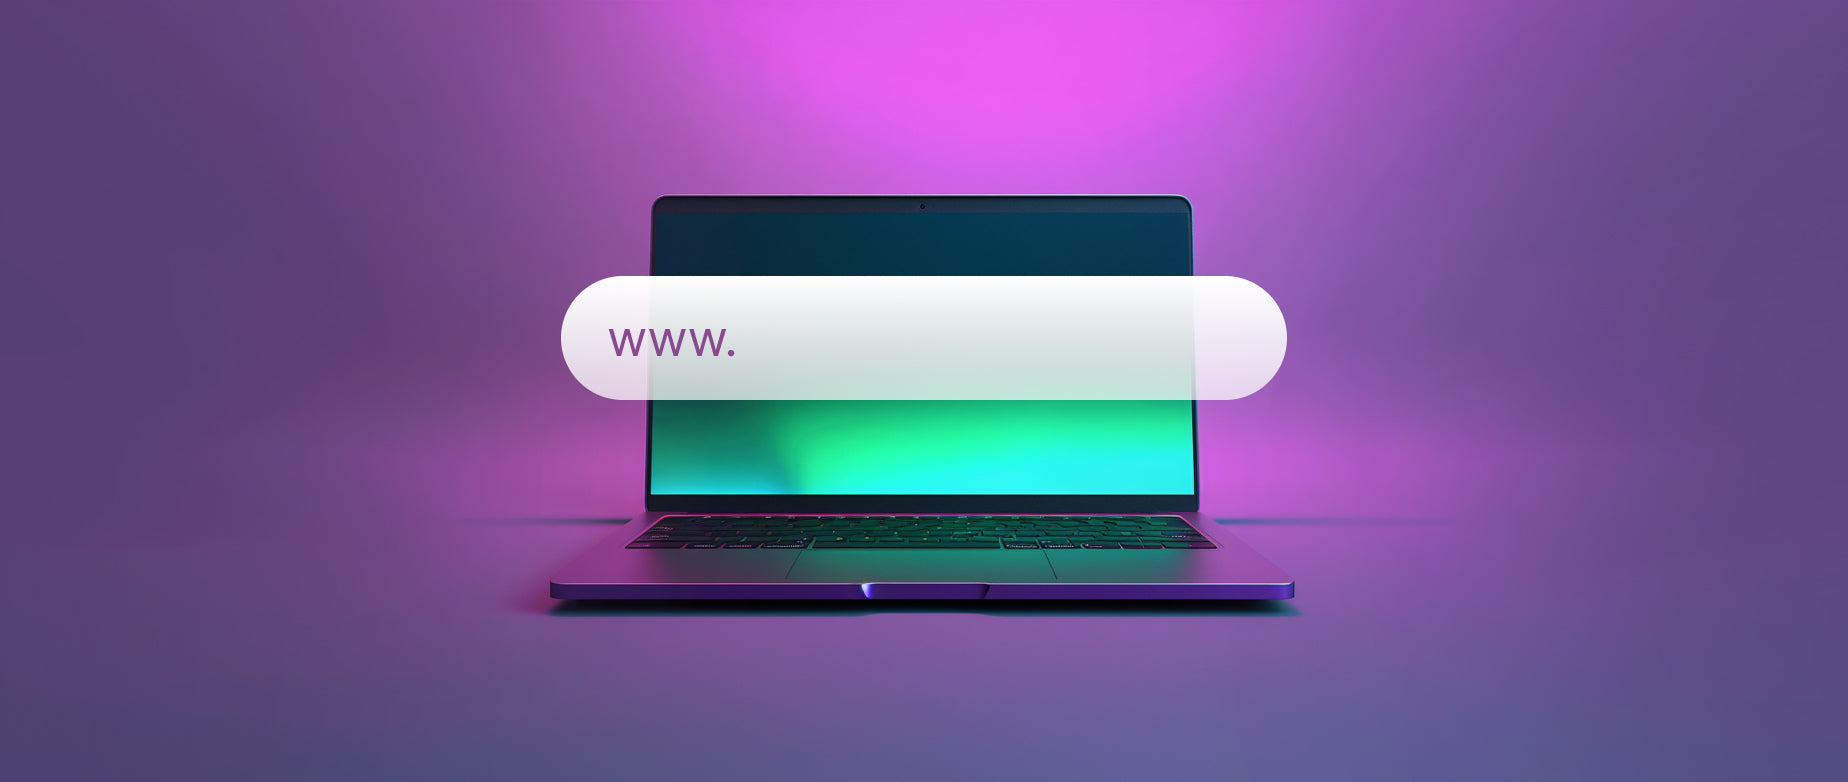 how to register a domain name: laptop with a search bar superimposed over it and www